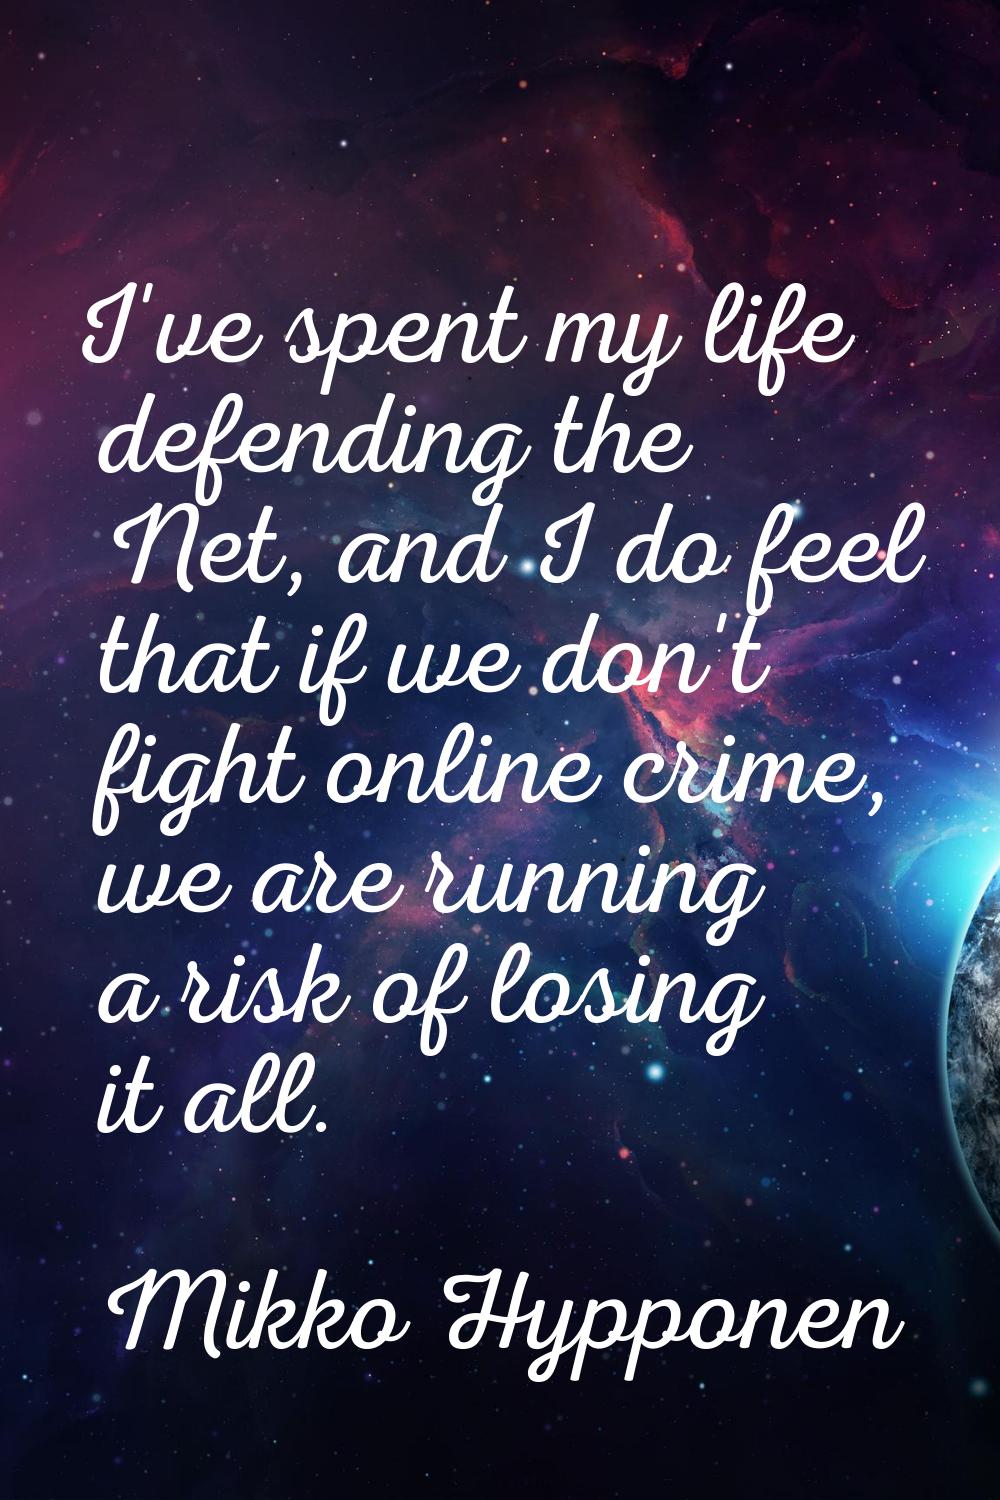 I've spent my life defending the Net, and I do feel that if we don't fight online crime, we are run